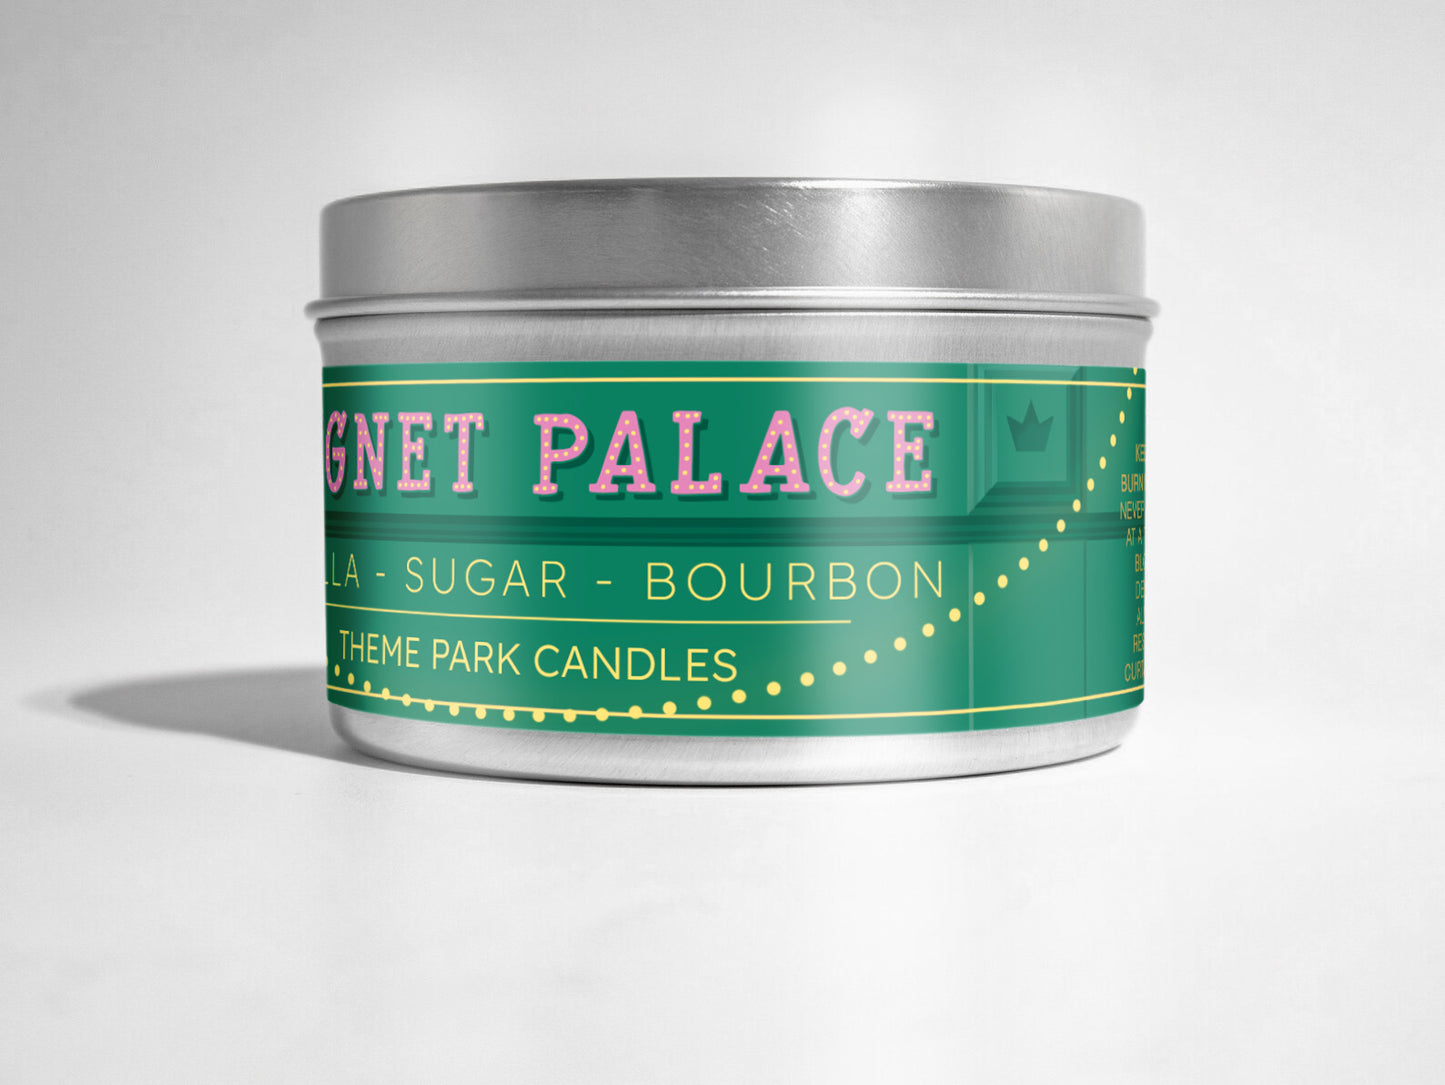 Beignet Palace Candle